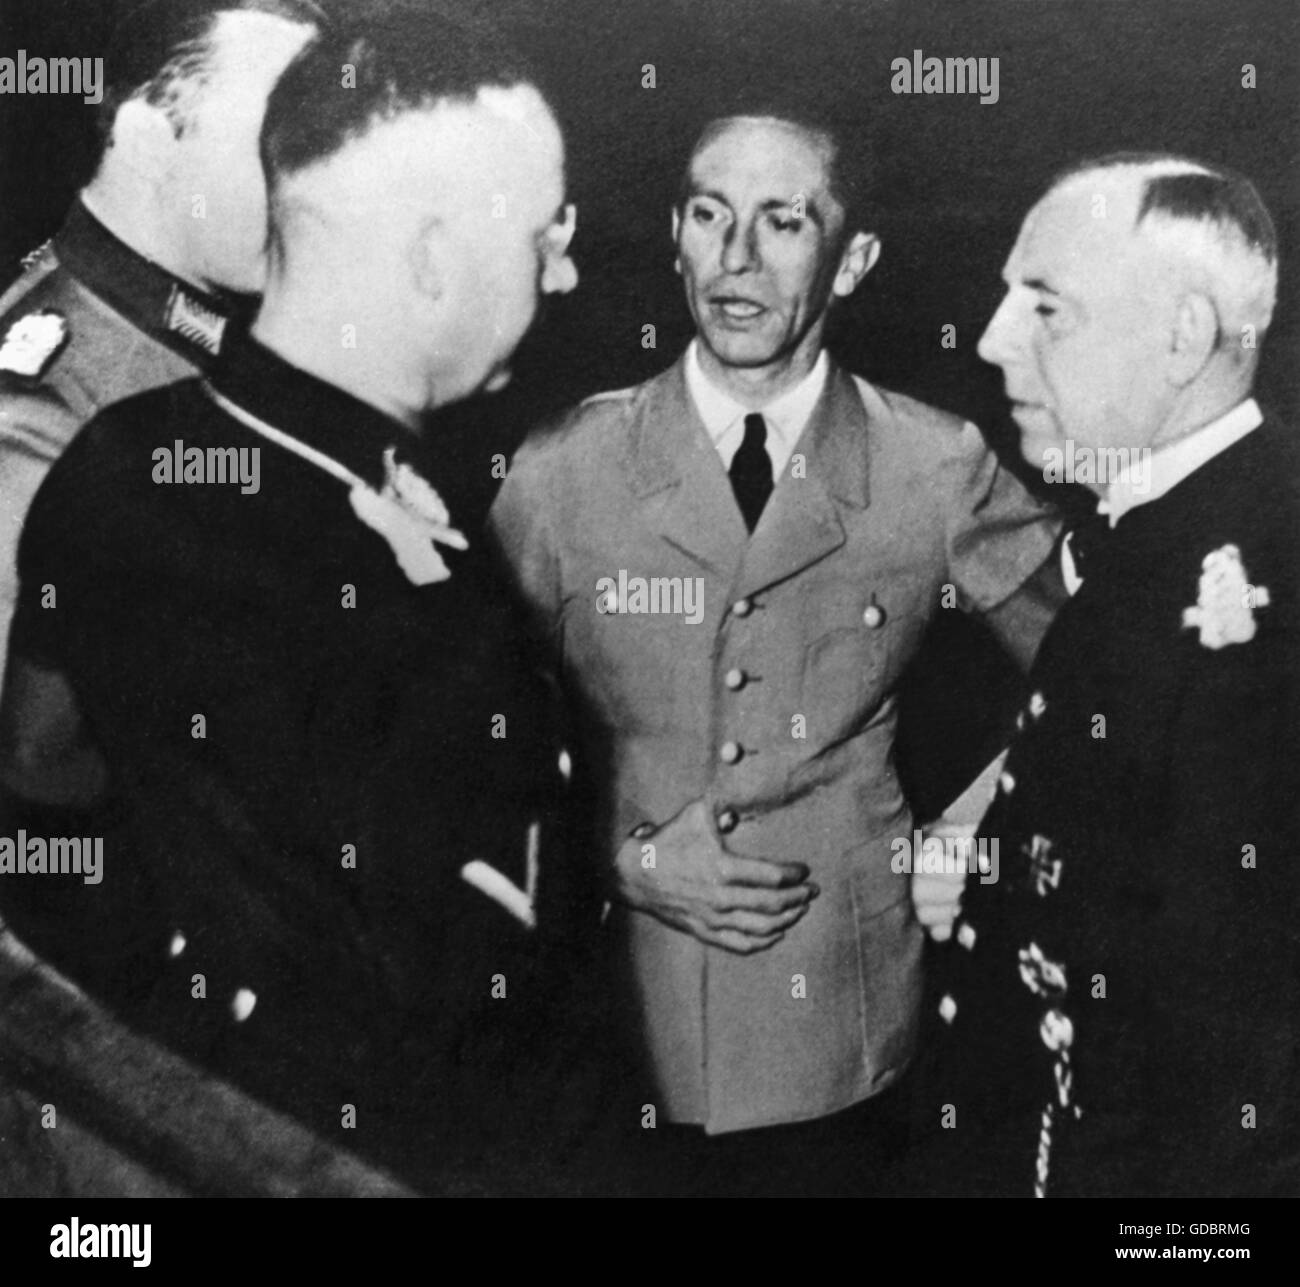 Canaris, Wilhelm, 1.1.1887 - 9.4.1945, German admiral, chief of the intelligence office (Amt Abwehr) of the German Wehrmacht 1935 - 1944, talking with Josef Goebbels and Heinrich Himmler, Berlin, 1936, Stock Photo